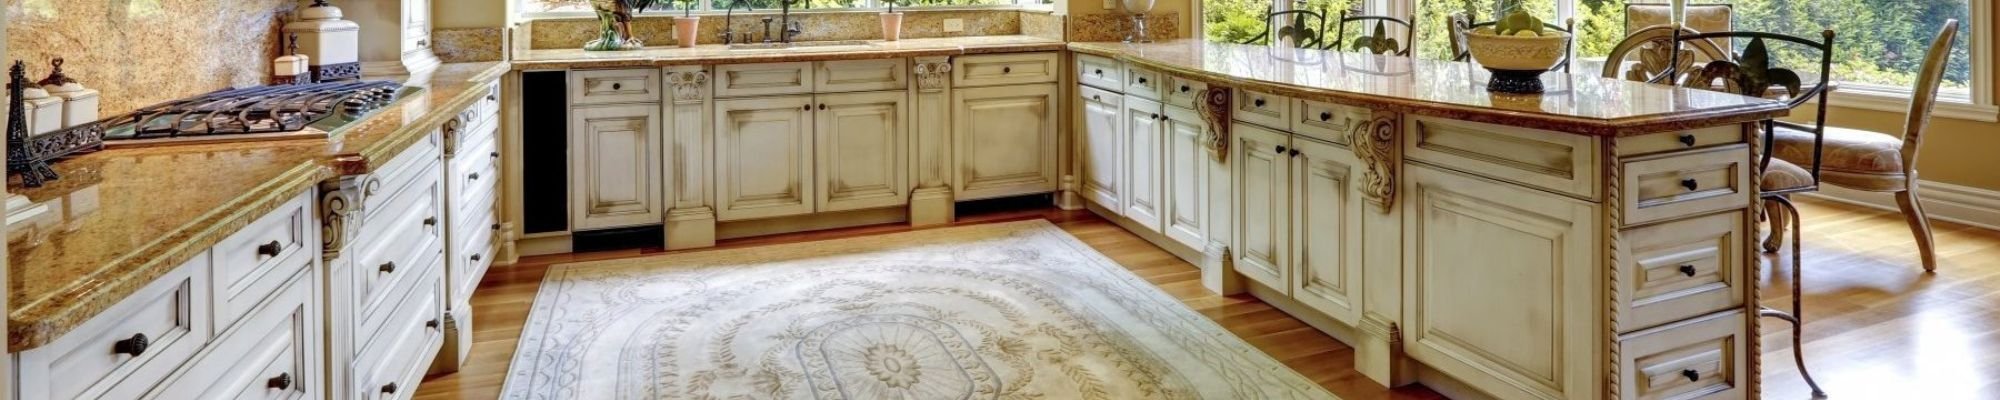 golden kitchen countertop from Henson's Greater Tennessee Flooring in Knoxville TN